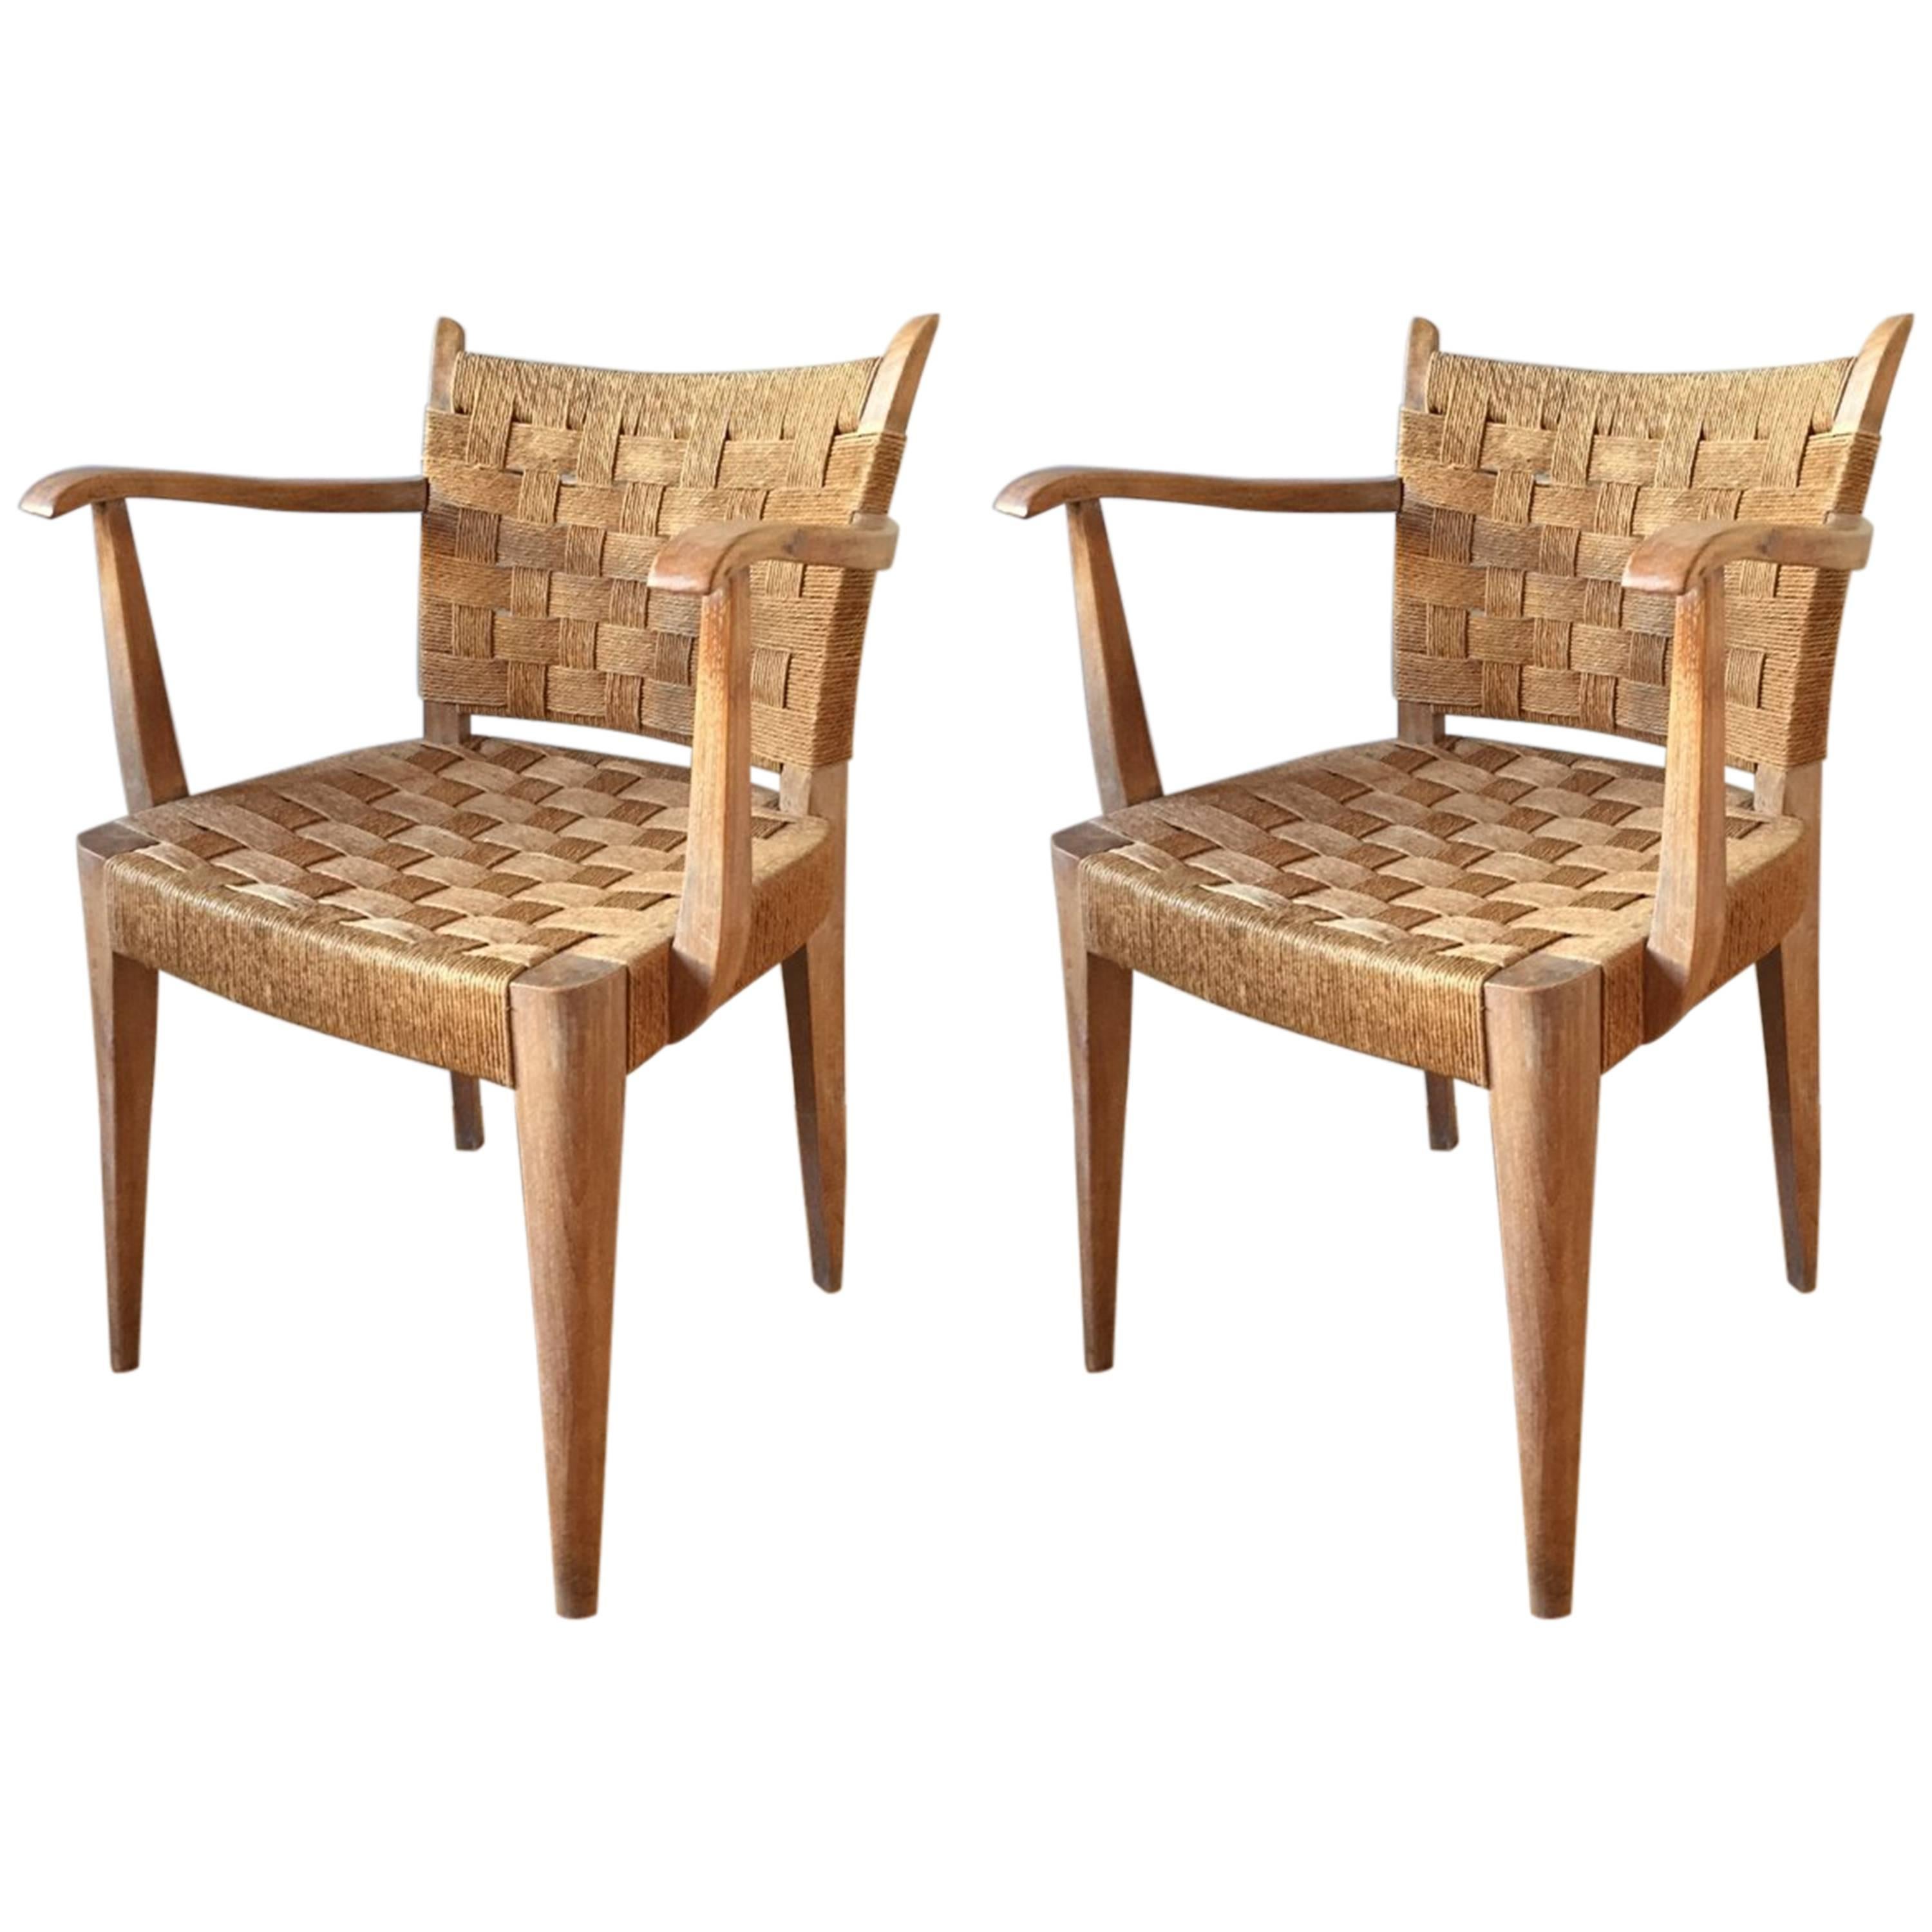 Pair of Art Deco Limed and Seagrass Armchairs